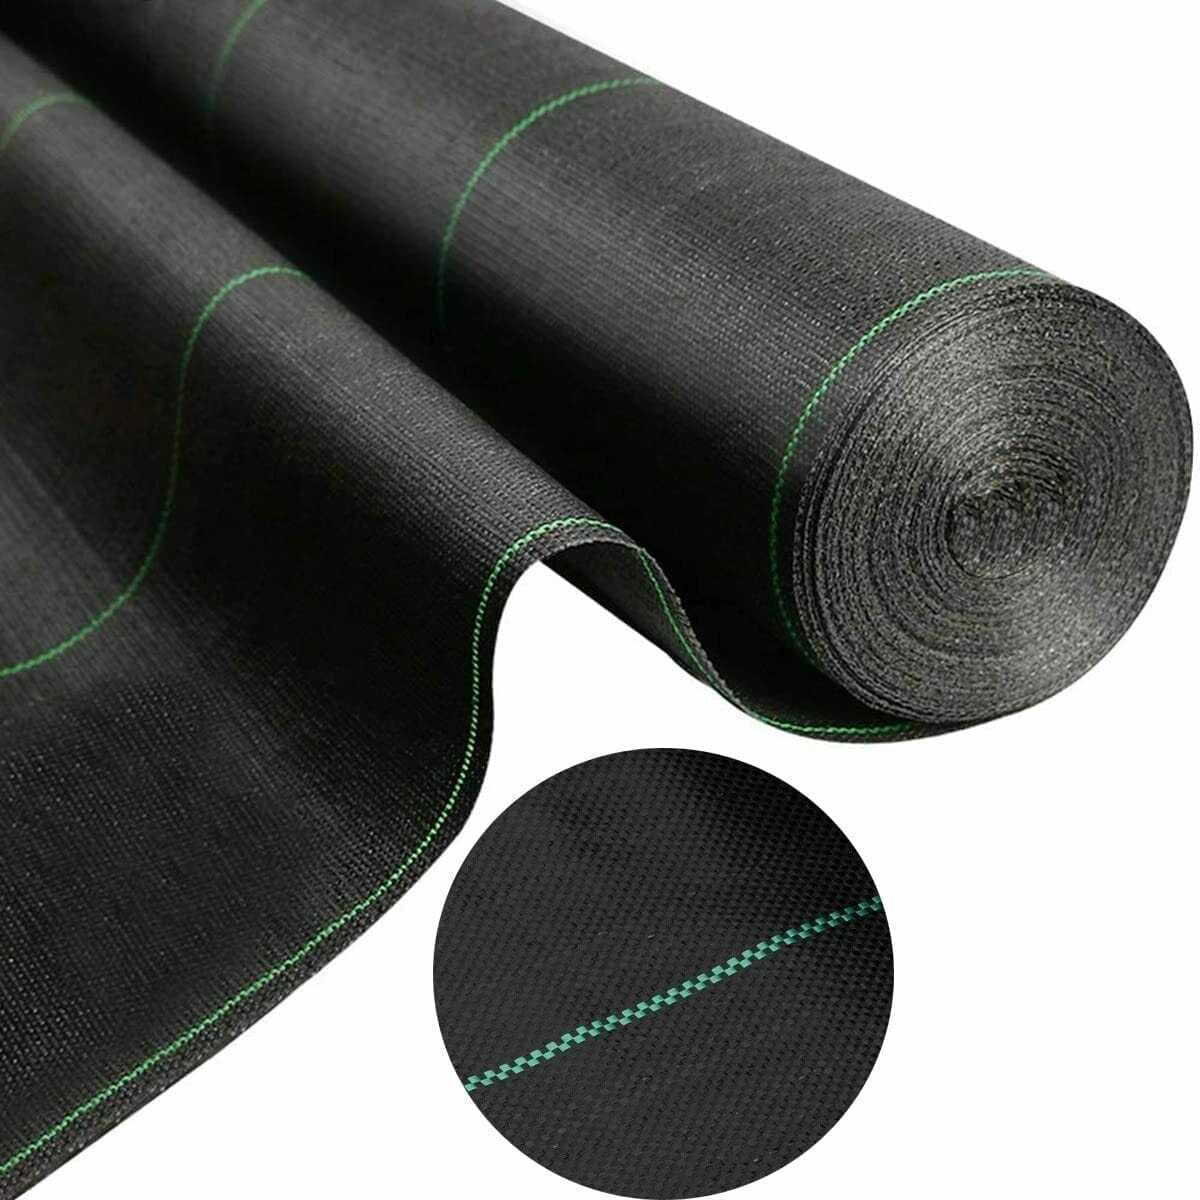 4 ft. x 300 ft. 2.3 oz. Non-woven Fabric Weed Barrier Landscape Fabric